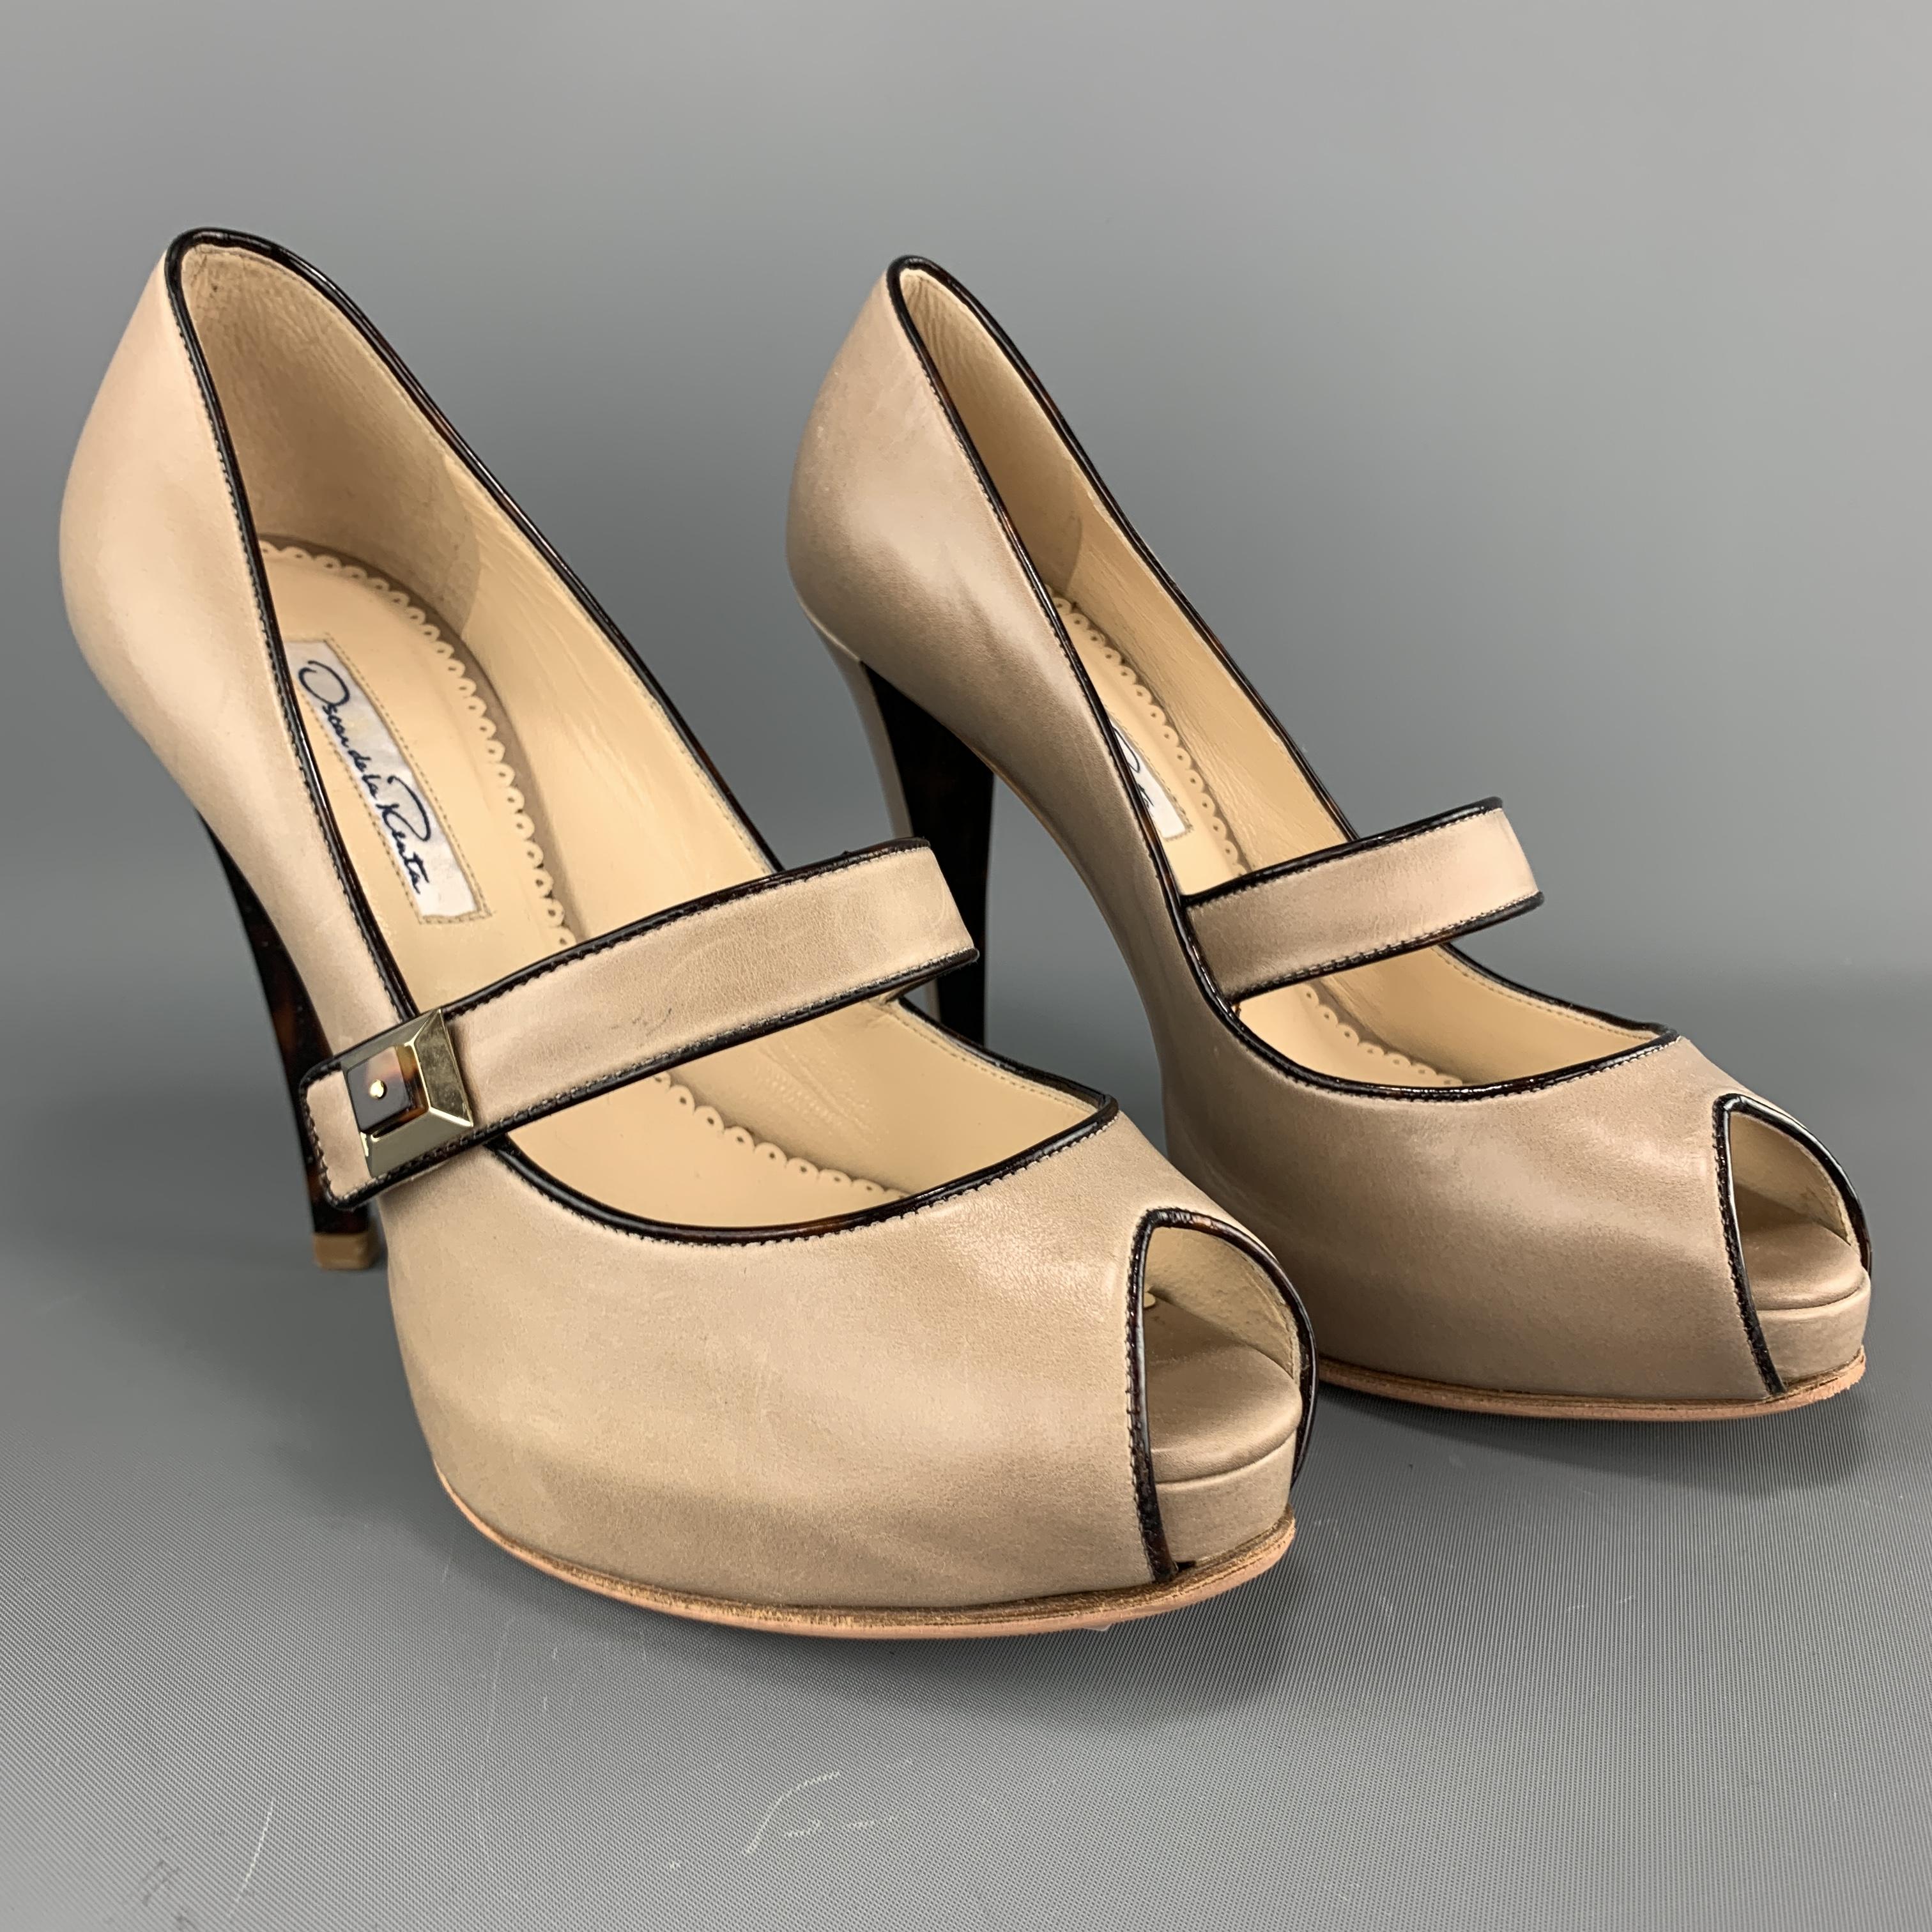 OSCAR DE LA RENTA pumps come in taupe leather with patent leather piping, peep toe, hidden platform, patent detailed heel, and Mary Jane strap with stud. Made in Italy.

Excellent Pre-Owned Condition.
Marked: IT 36

Heel: 4.25 in.
Platform: 0.75 in.